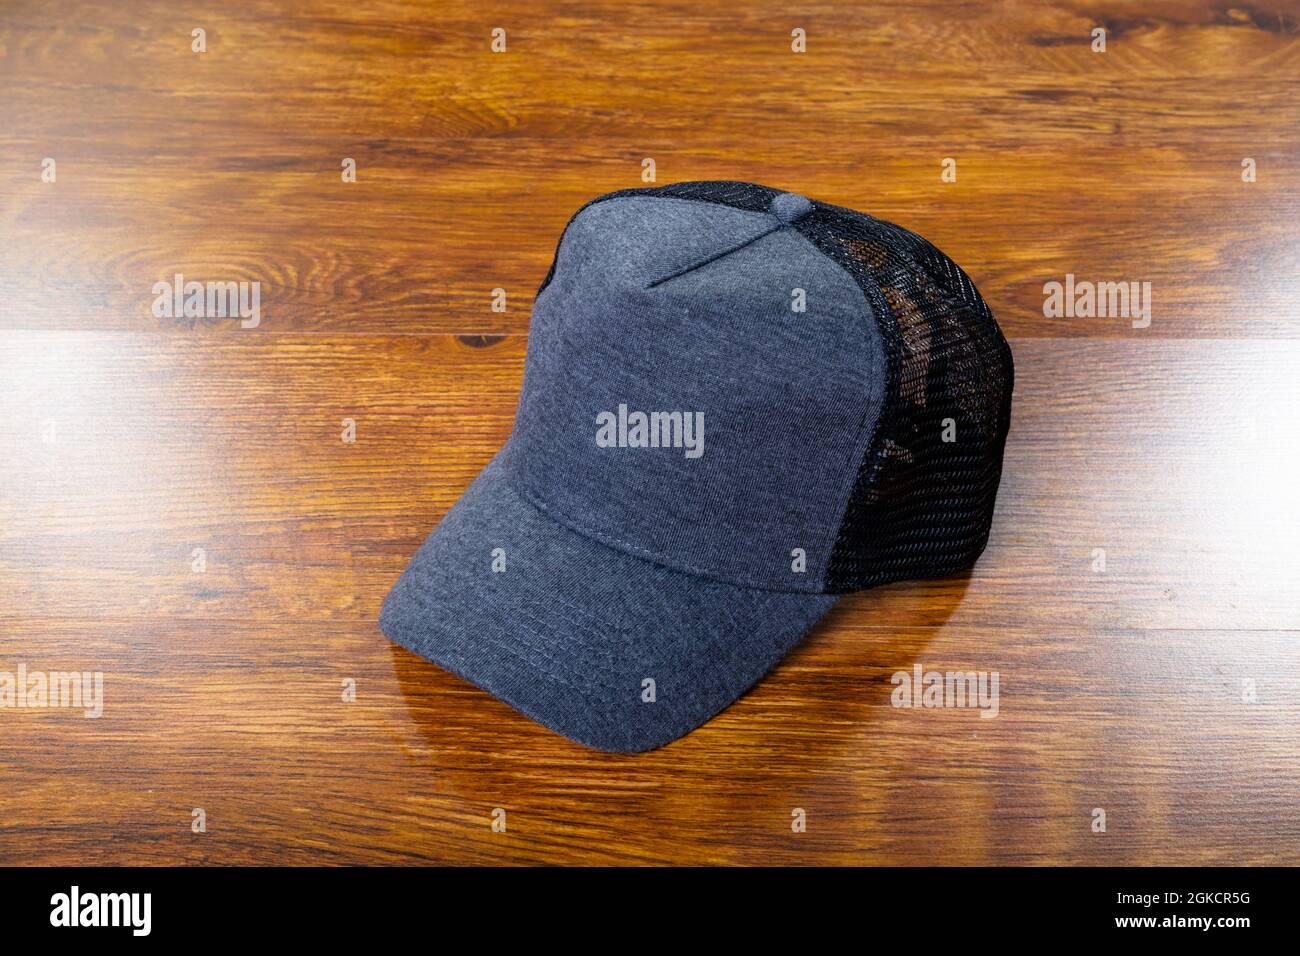 Composition of close up of grey and black baseball cap on wooden background Stock Photo